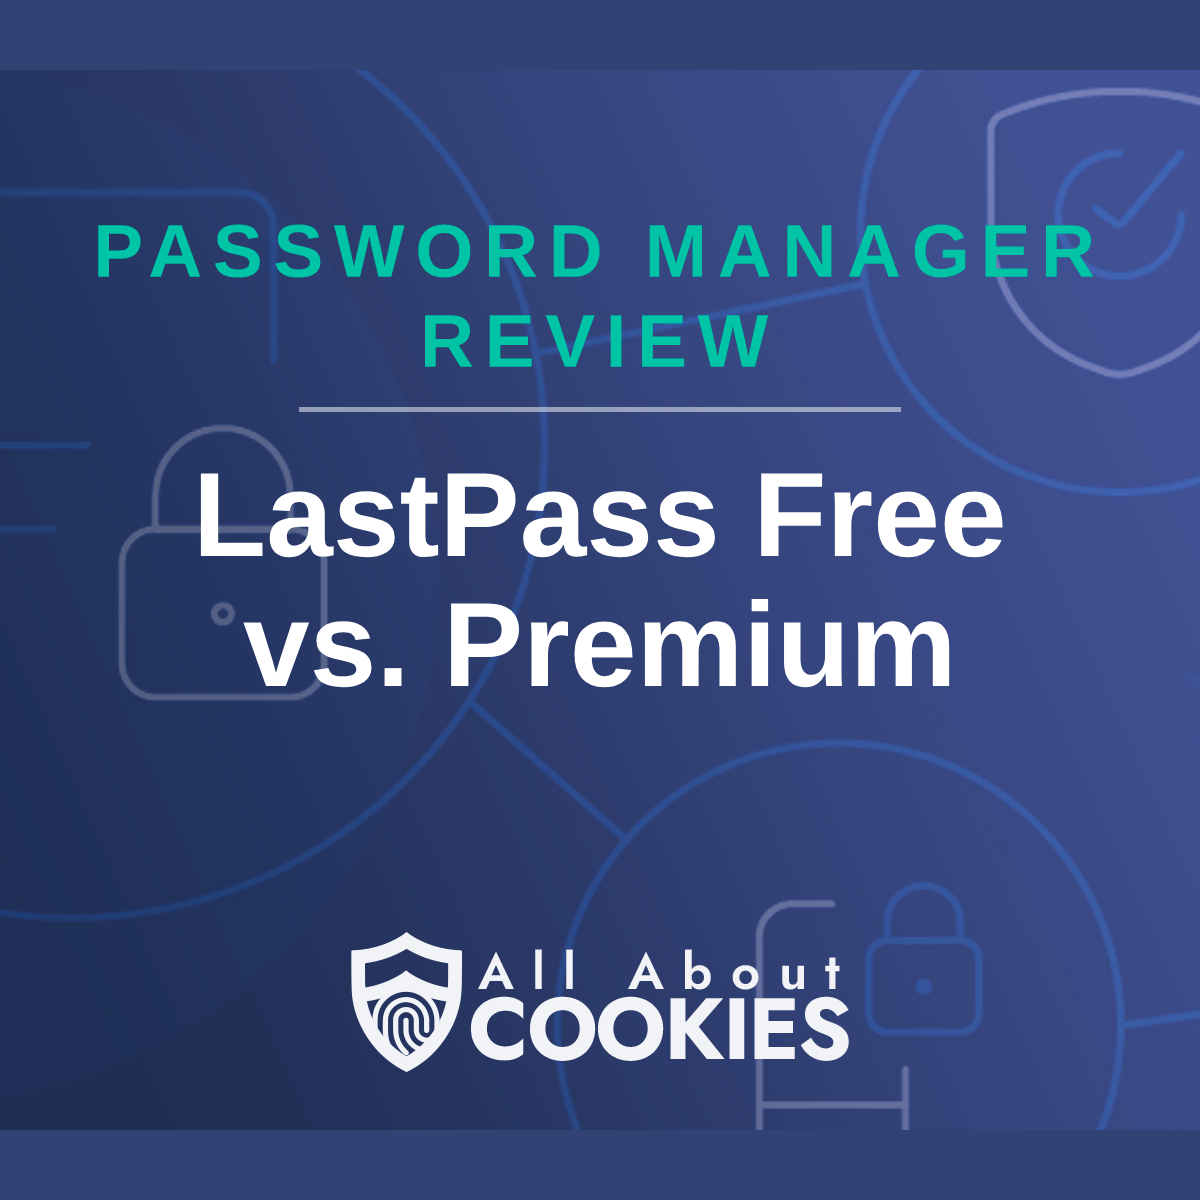 A blue background with images of locks and shields with the text &quot;LastPass Free vs. Premium&quot; and the All About Cookies logo. 